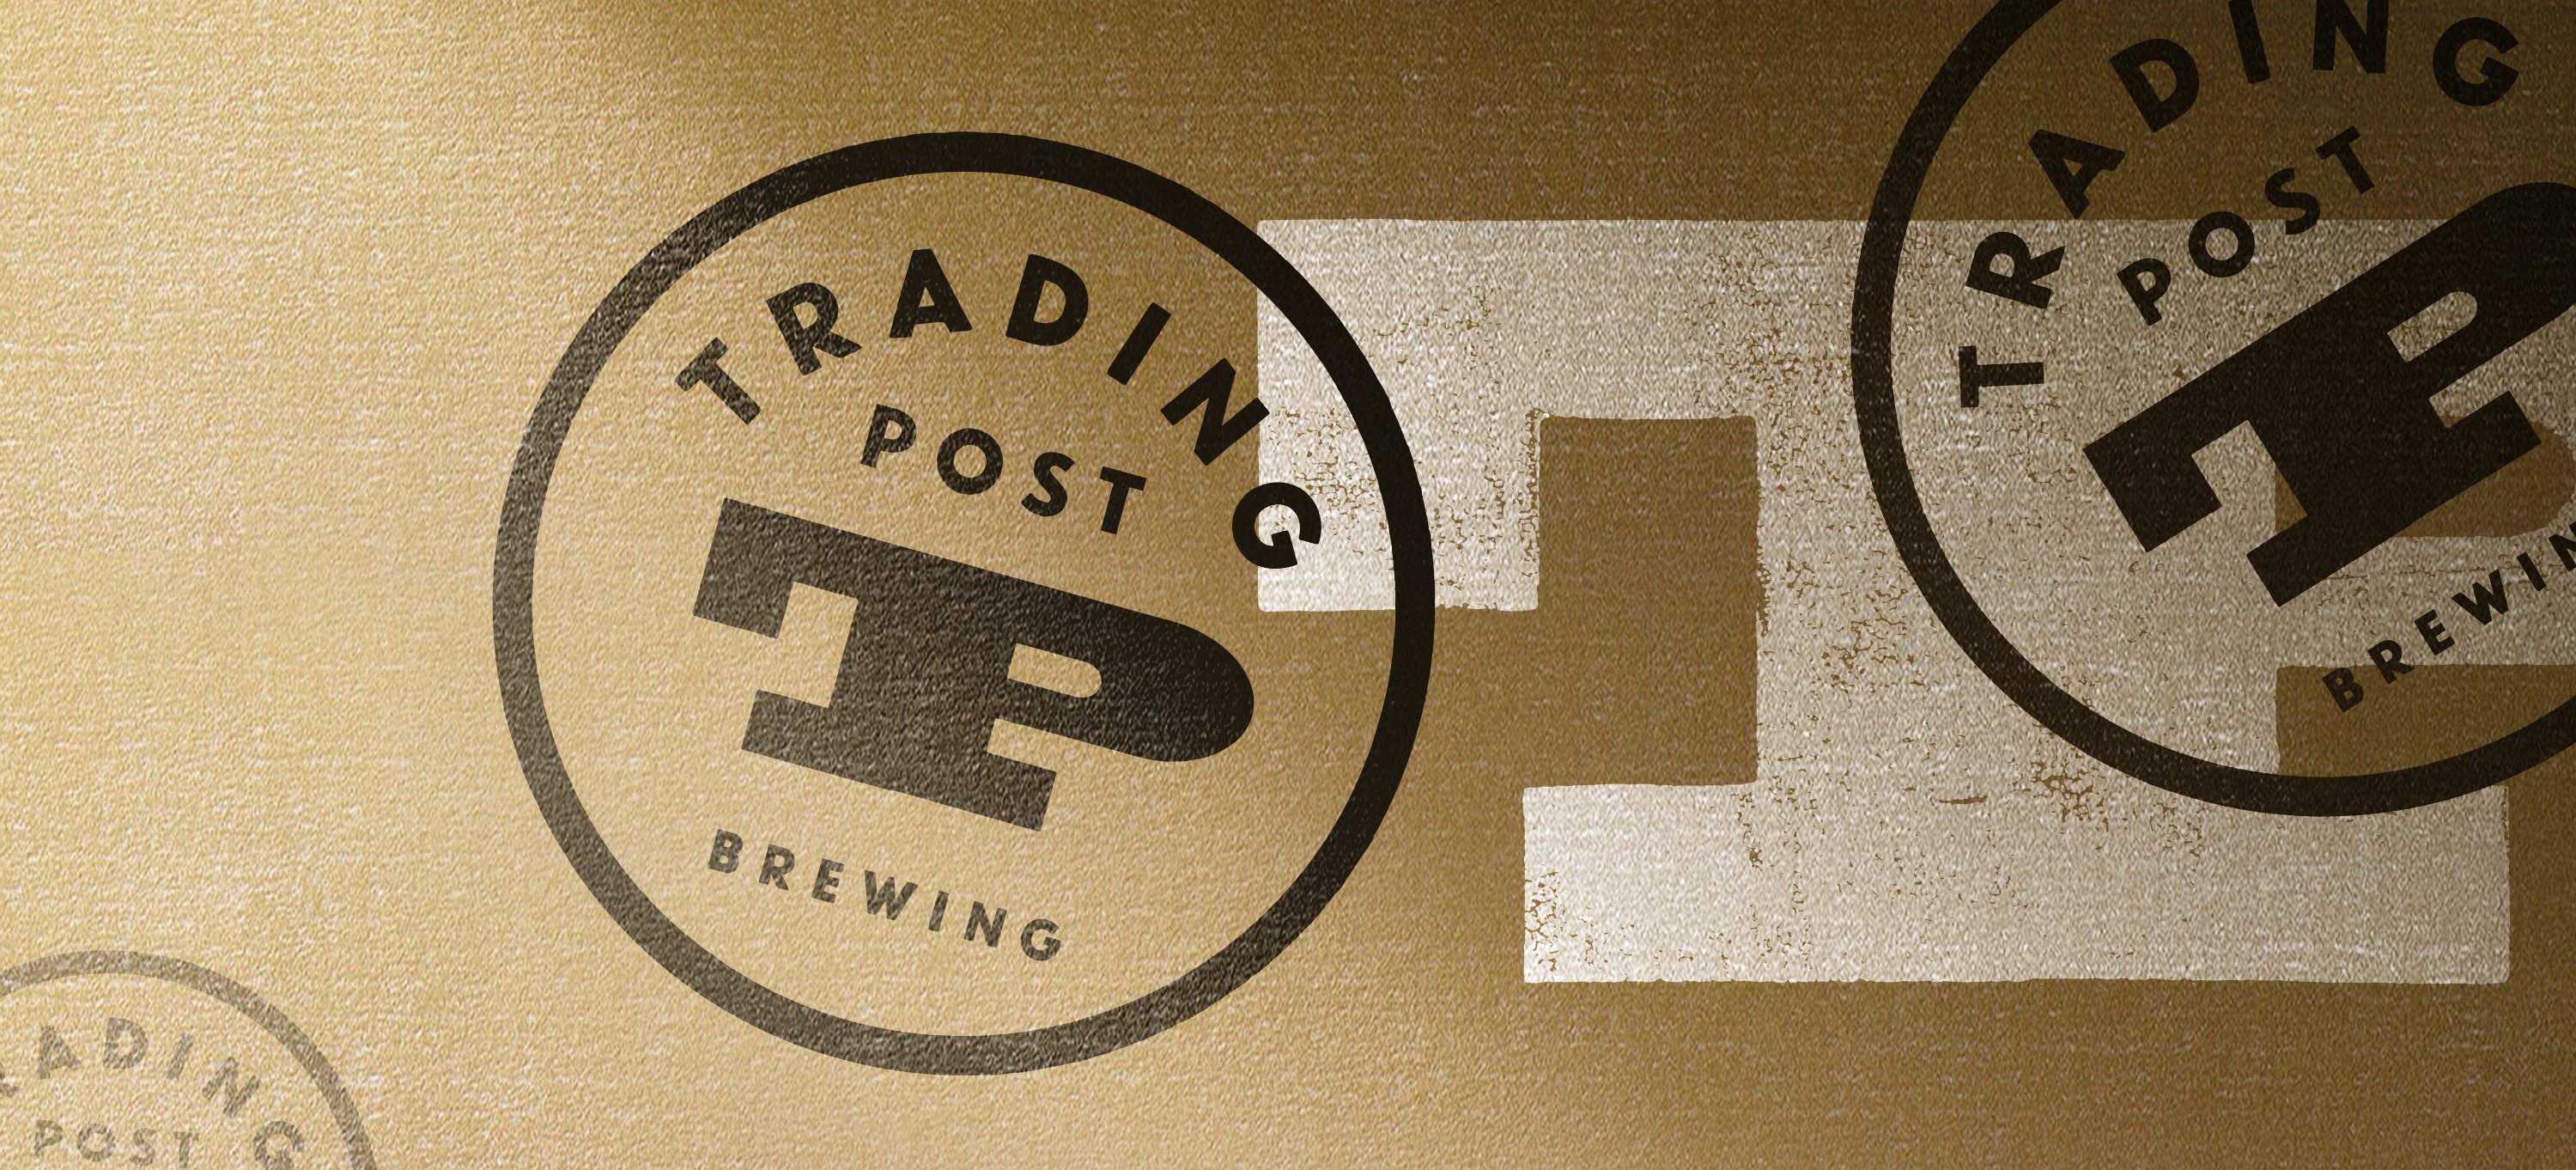 Trading Post Brewery Logo | Dossier Creative | Crafting a Brewery Experience